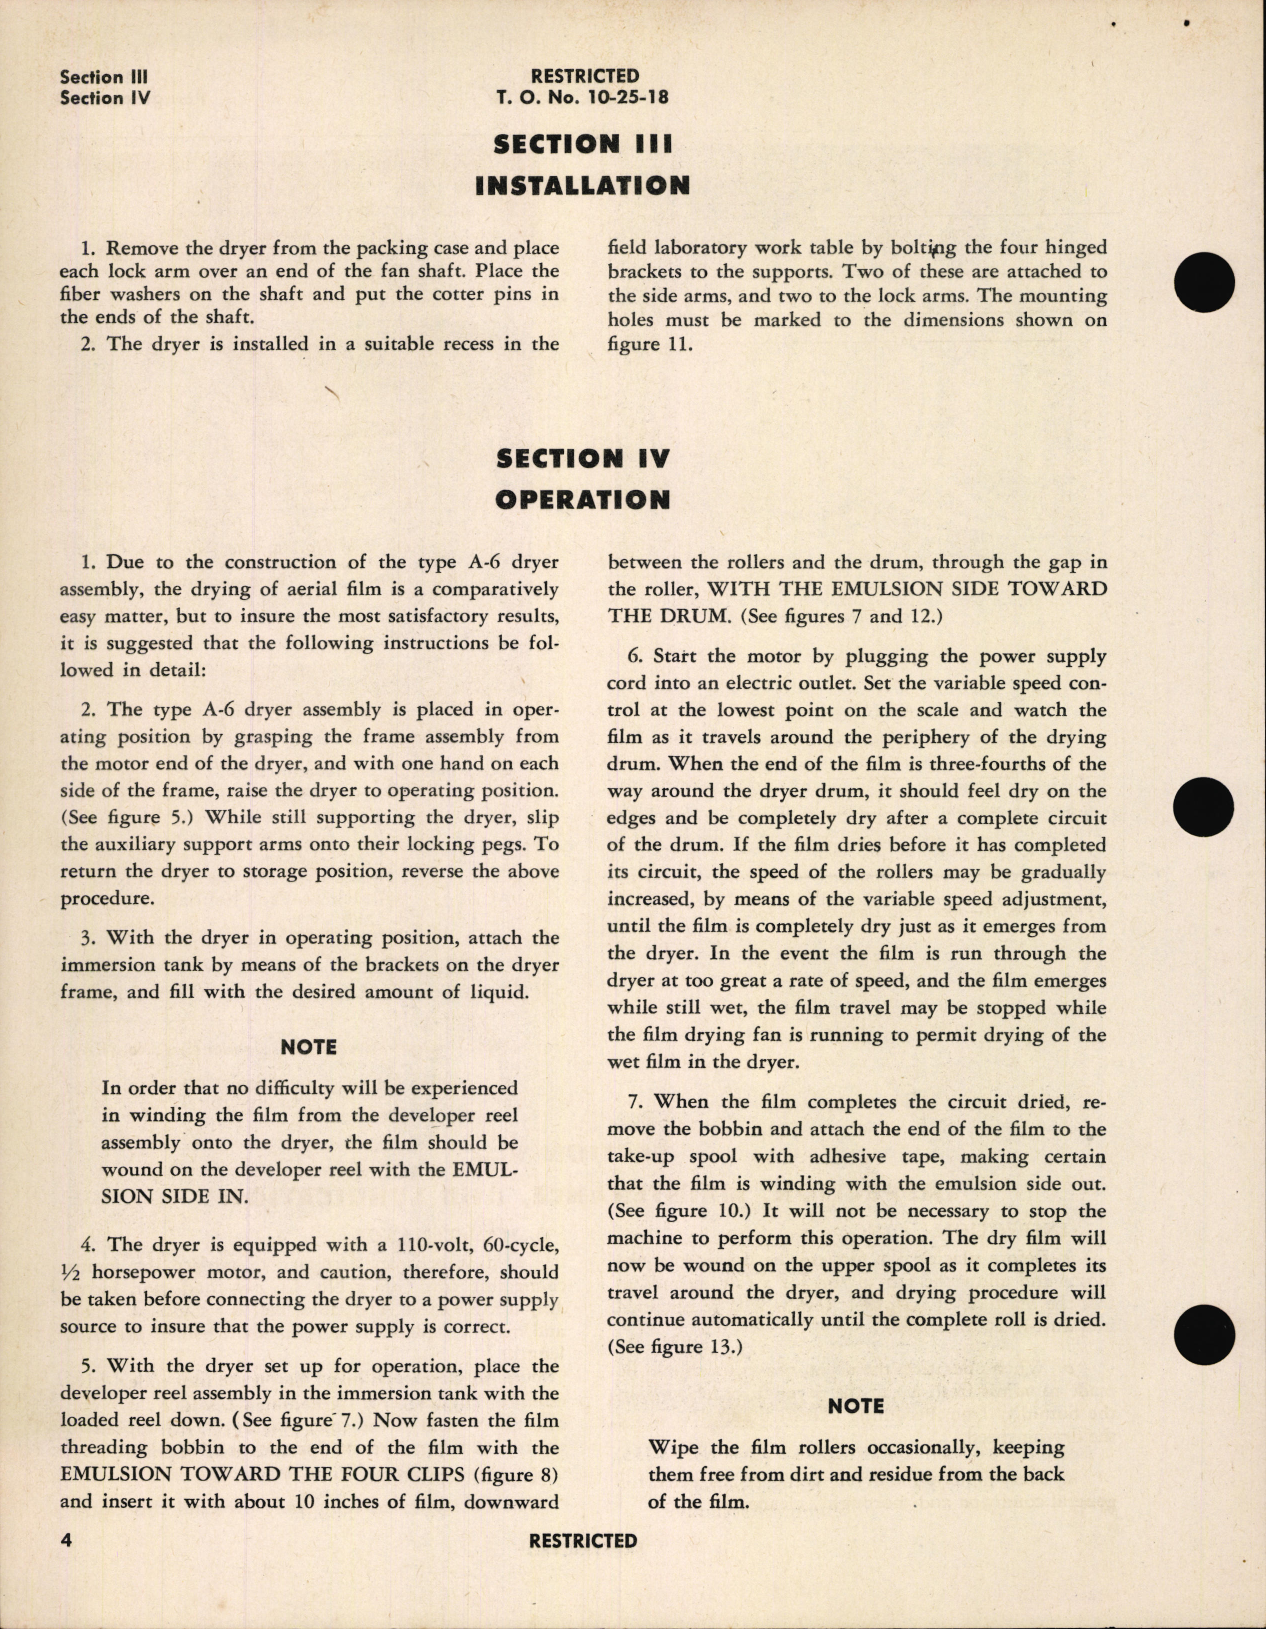 Sample page 8 from AirCorps Library document: Handbook of Instructions with Parts Catalog for Type A-6 Roll Film Dryer